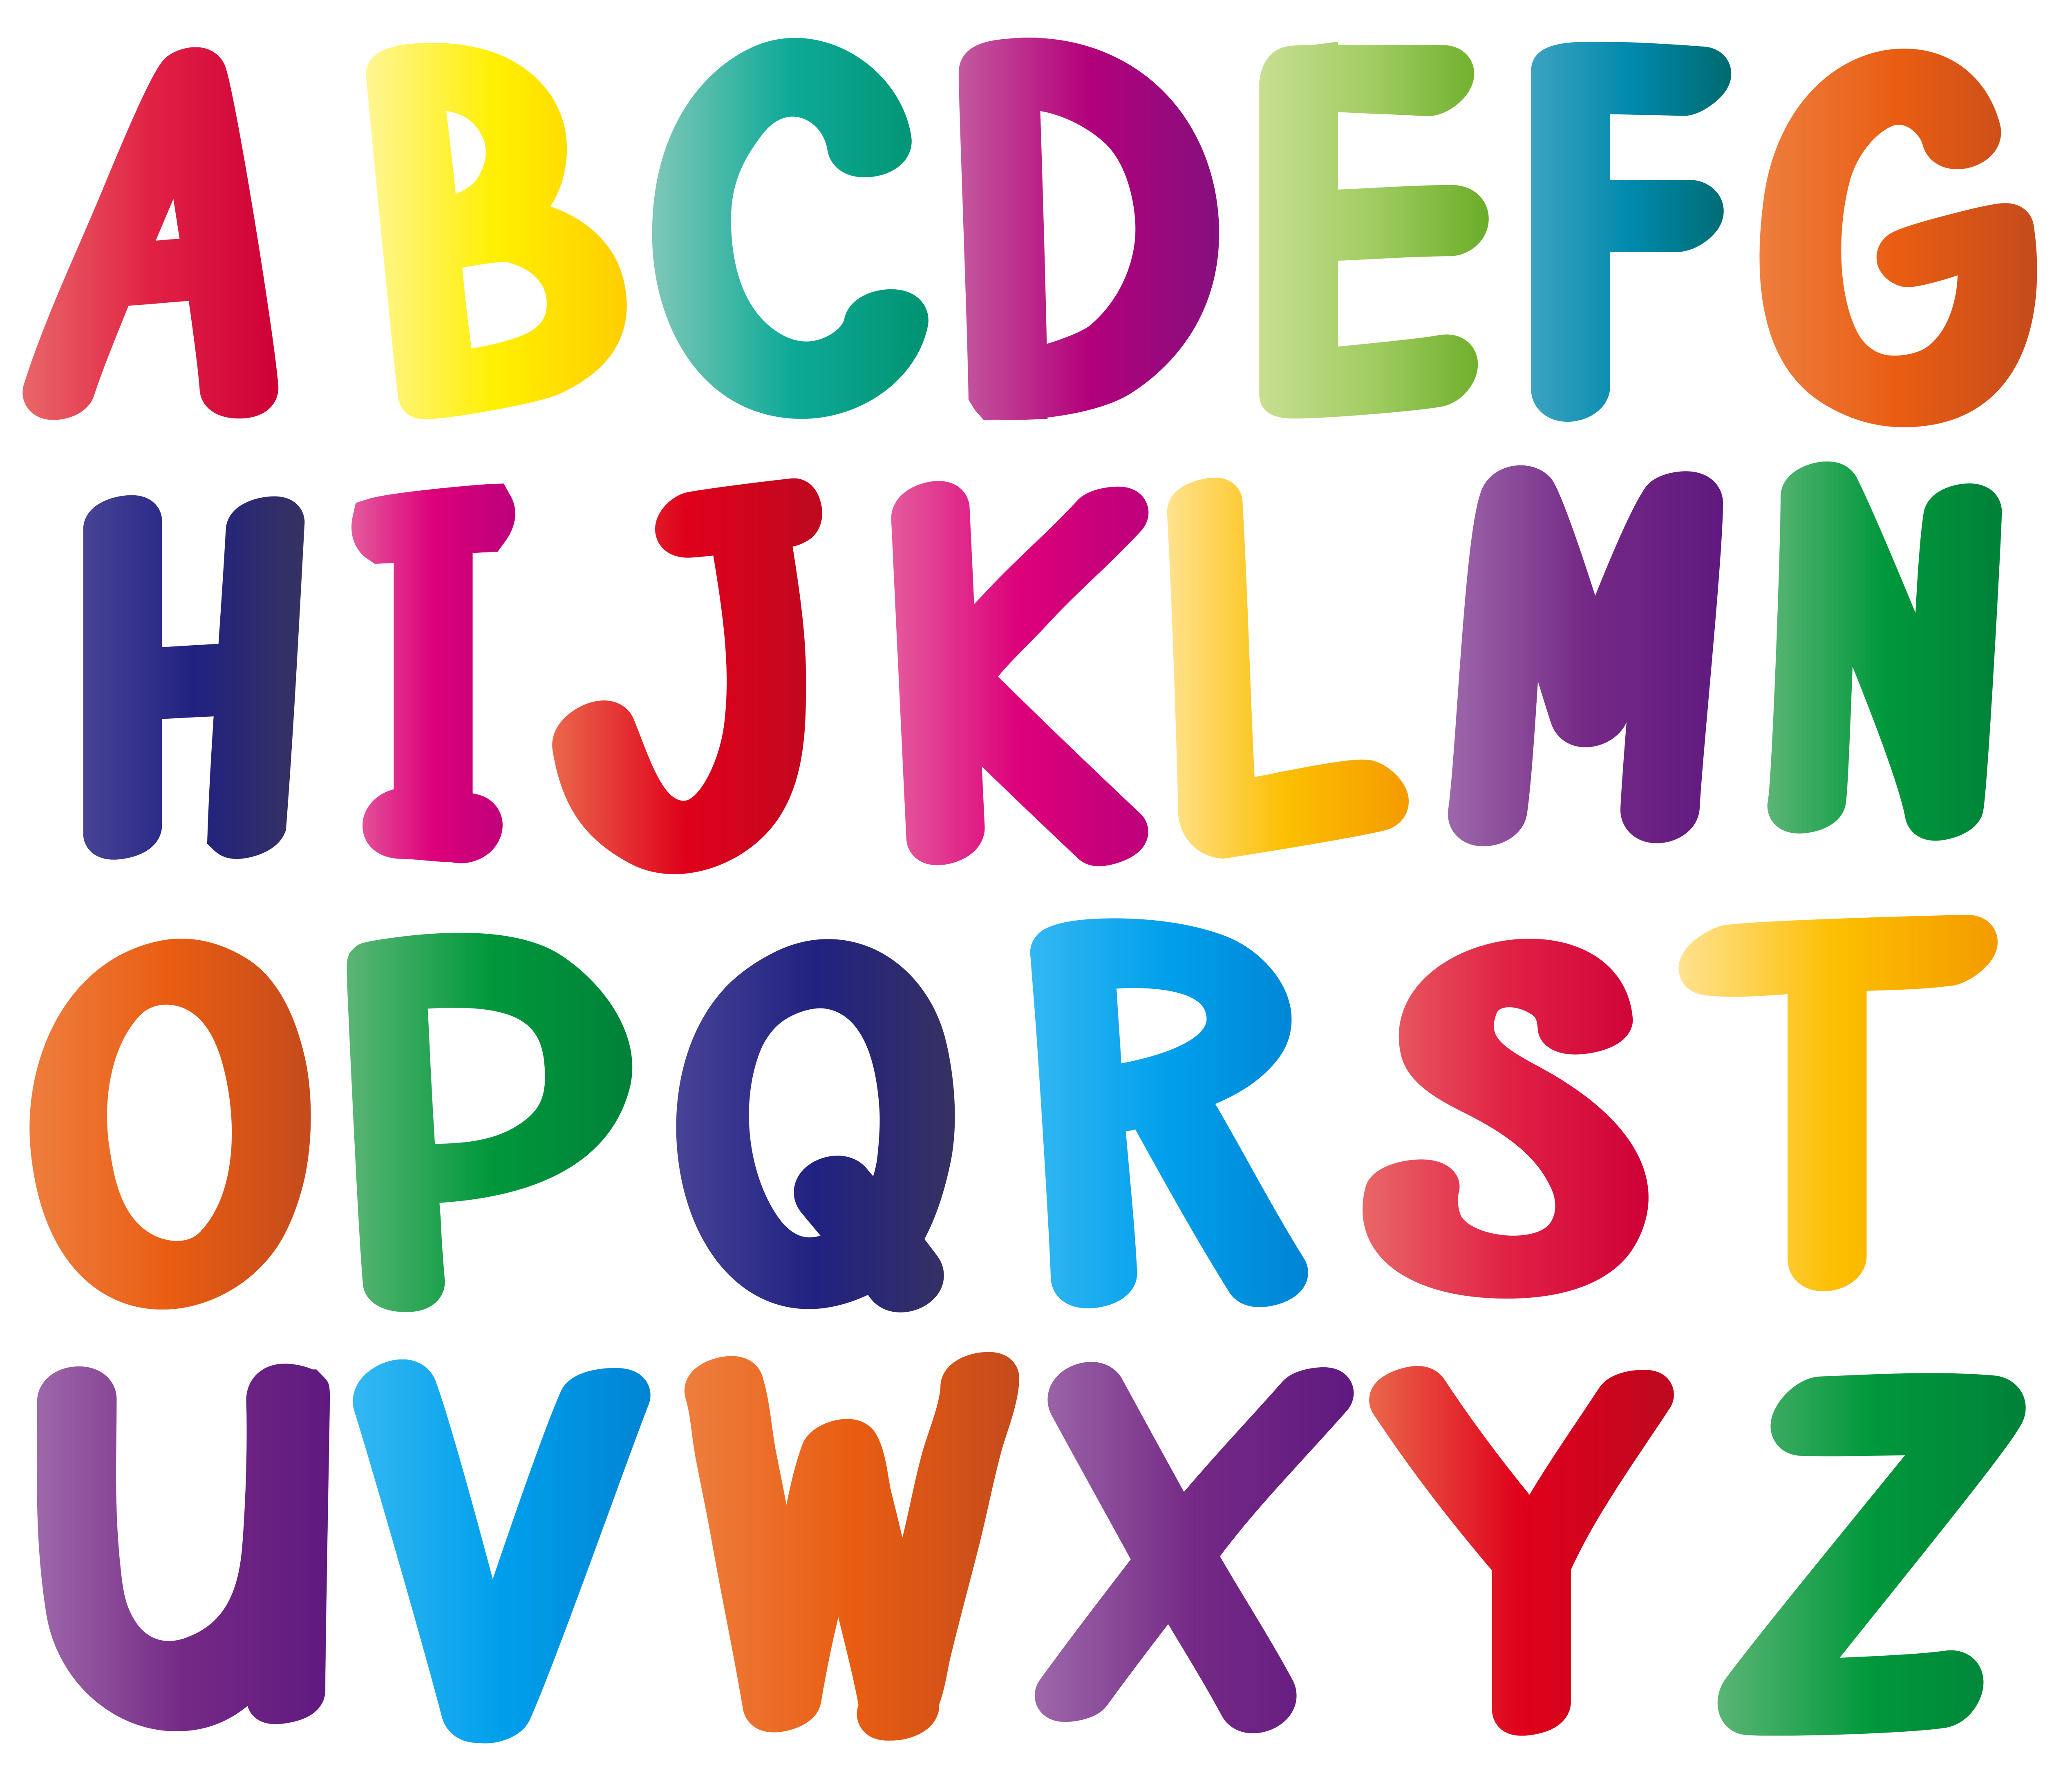 English alphabets in many colors - Download Free Vectors ...